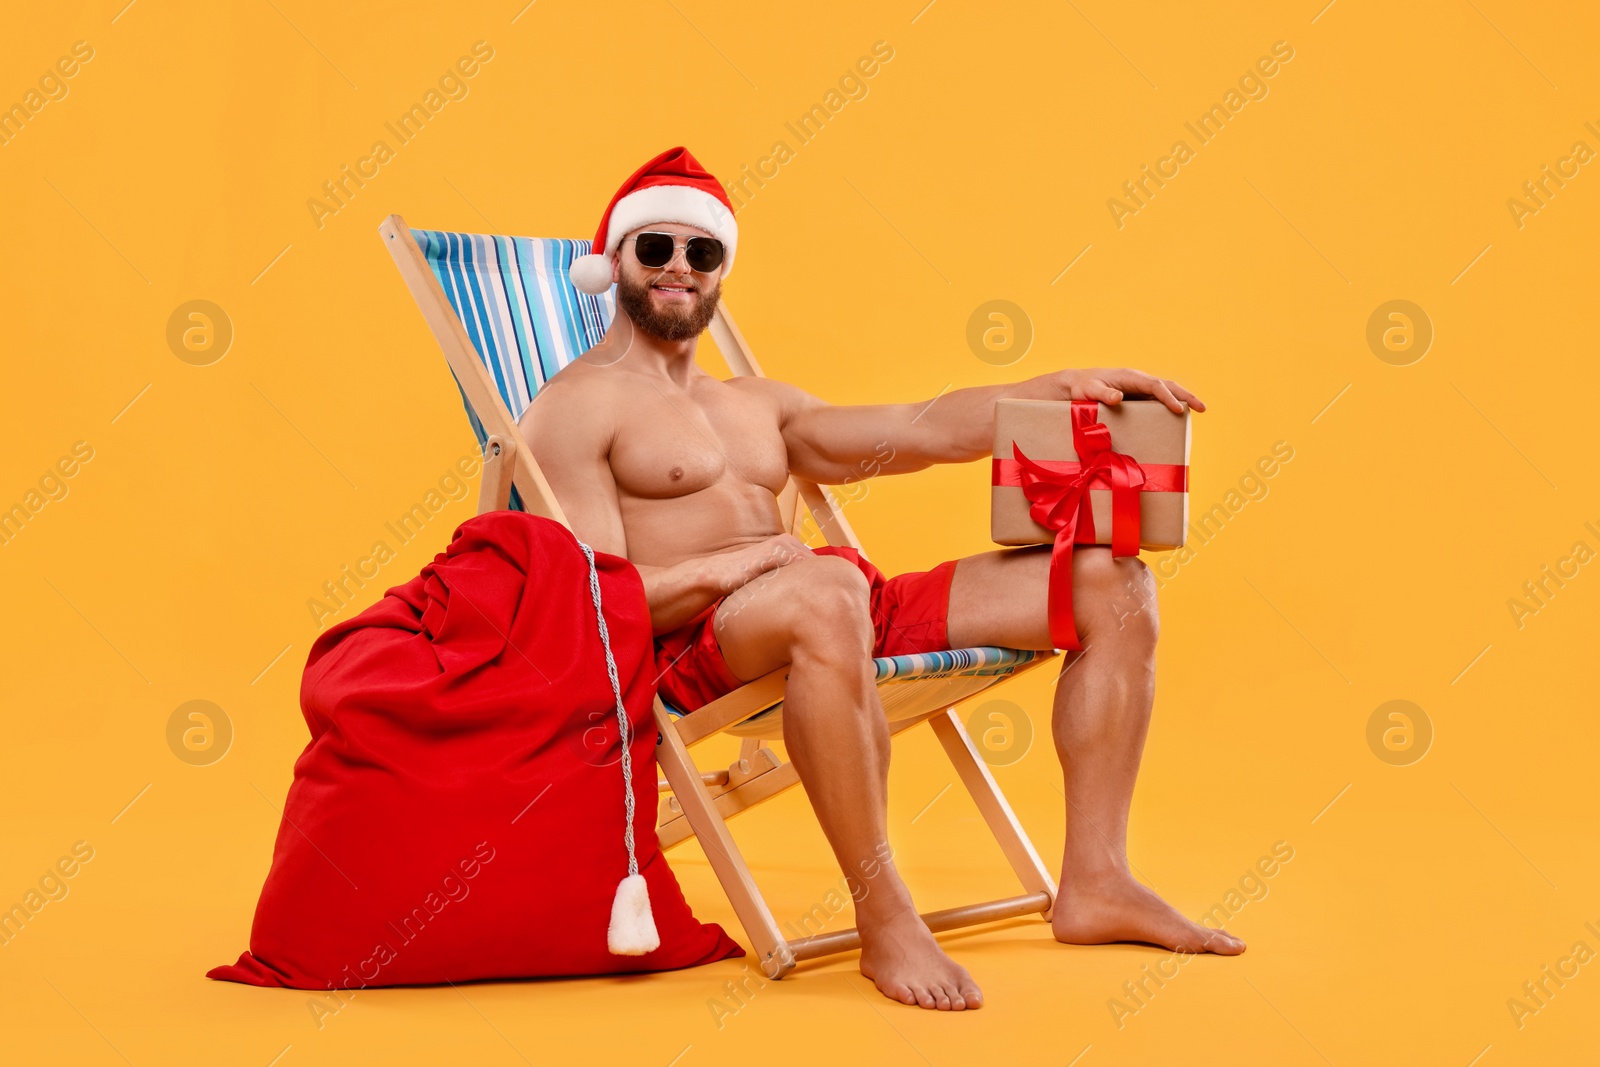 Photo of Muscular young man in Santa hat with deck chair, bag, sunglasses and Christmas gift box on orange background